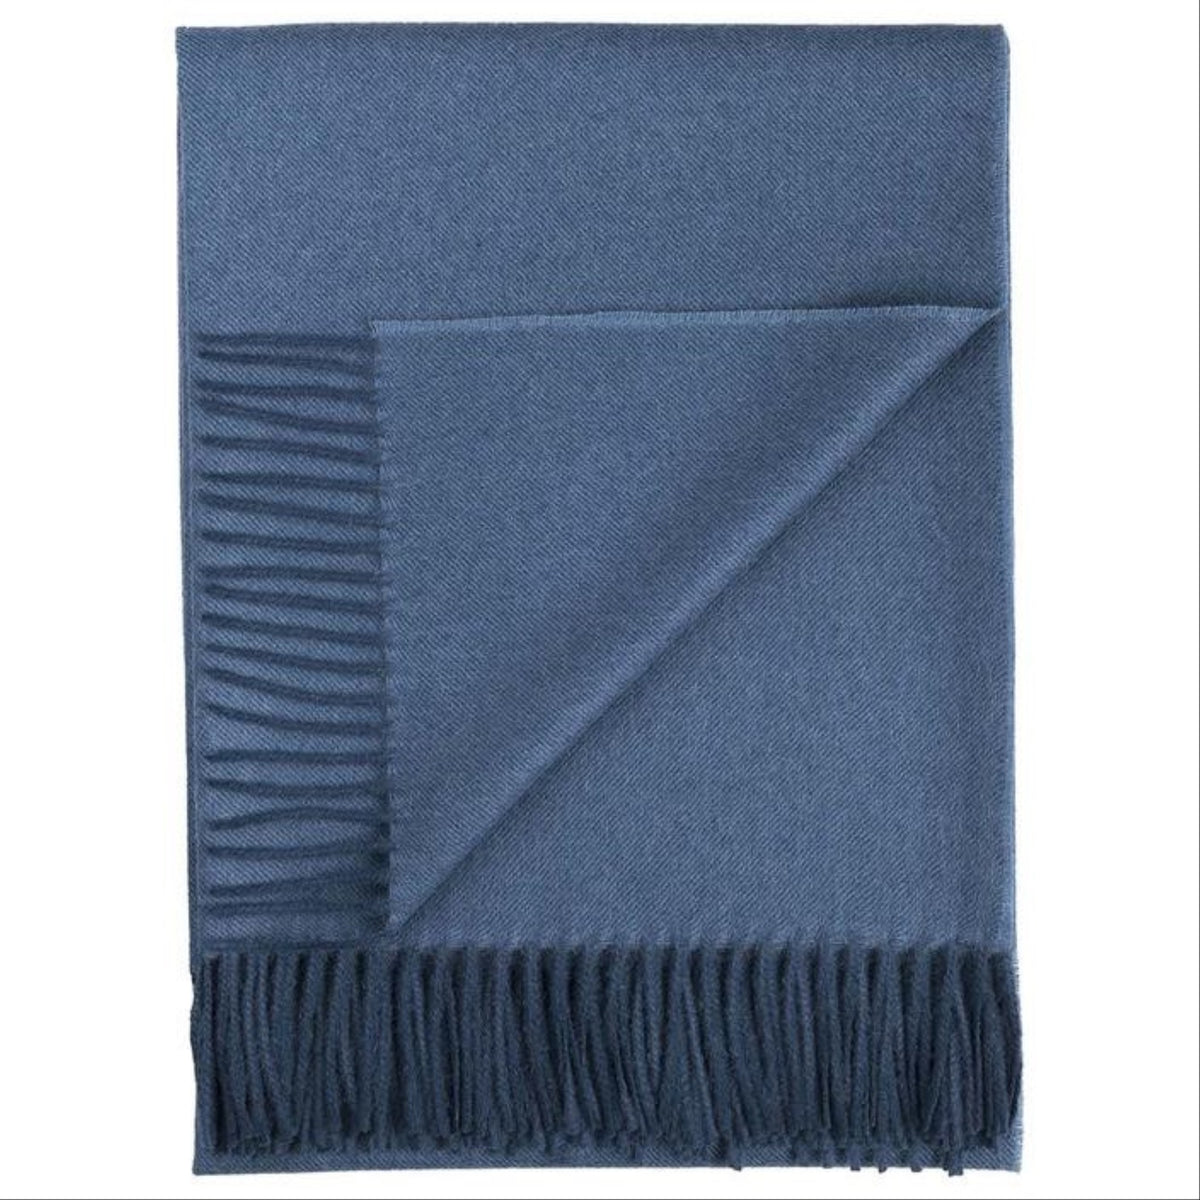 Closeup Image of Downtown Company Alpaca Throws in Blue Jean Color